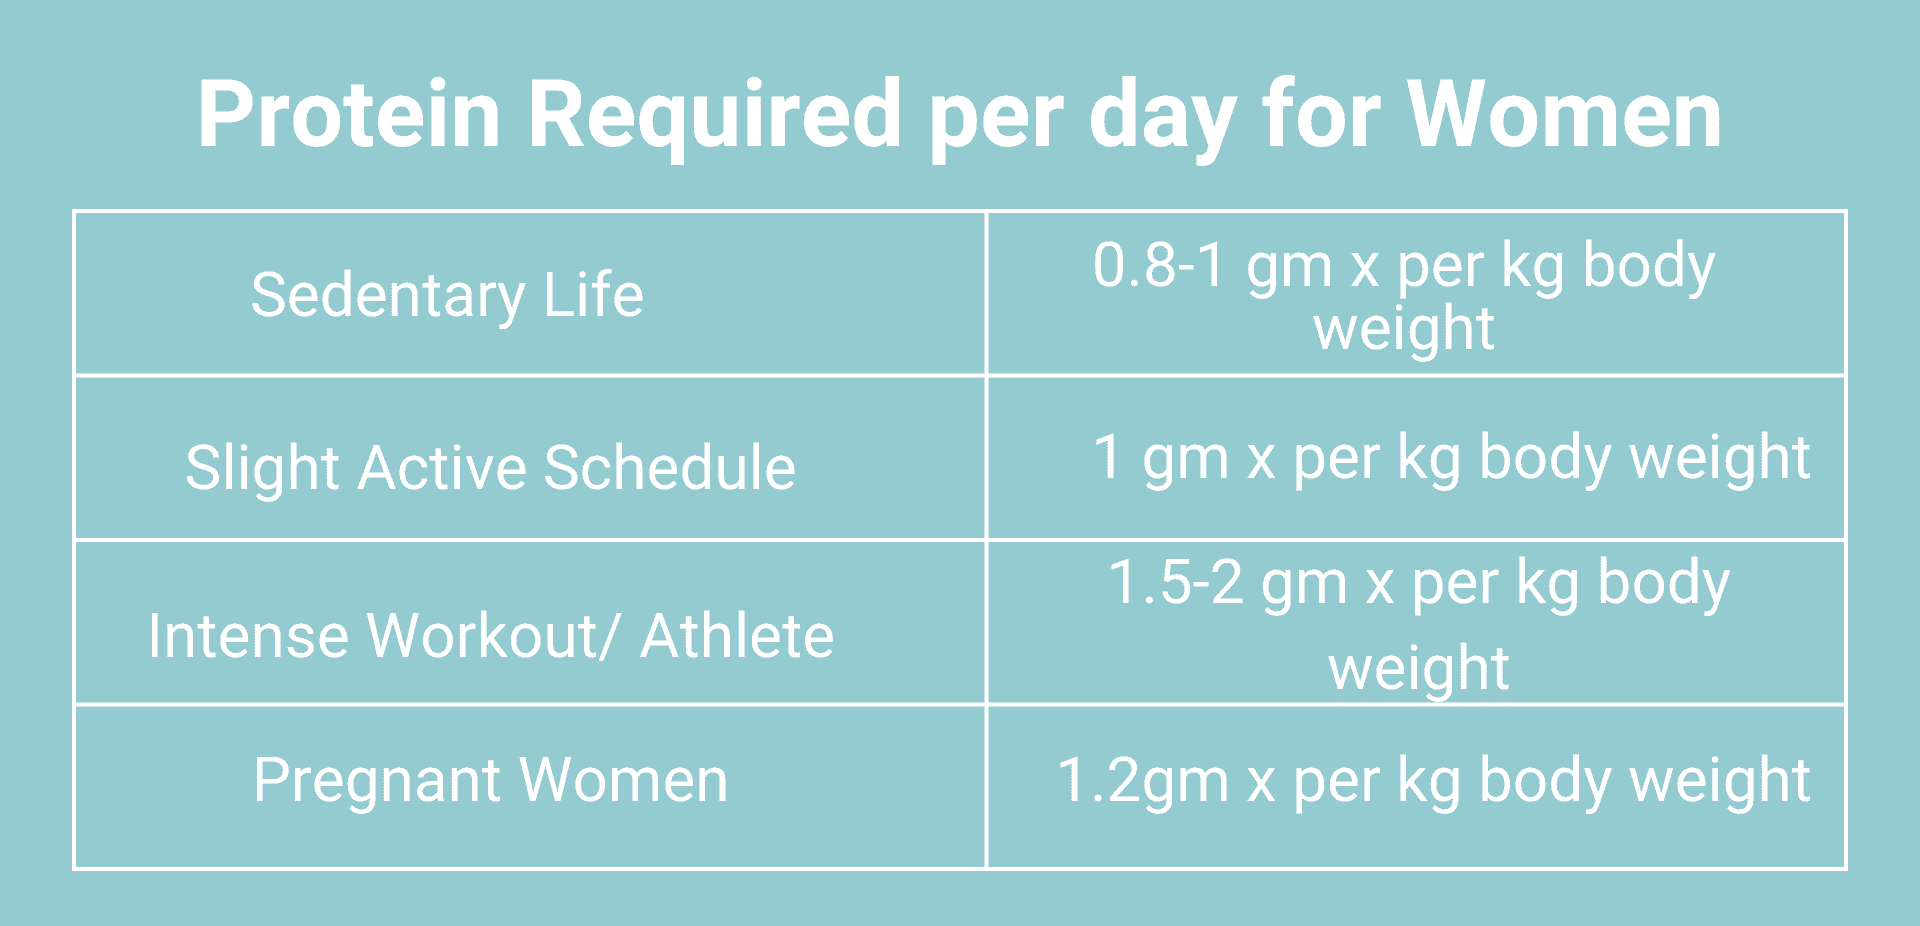 Protein requirements for active lifestyles